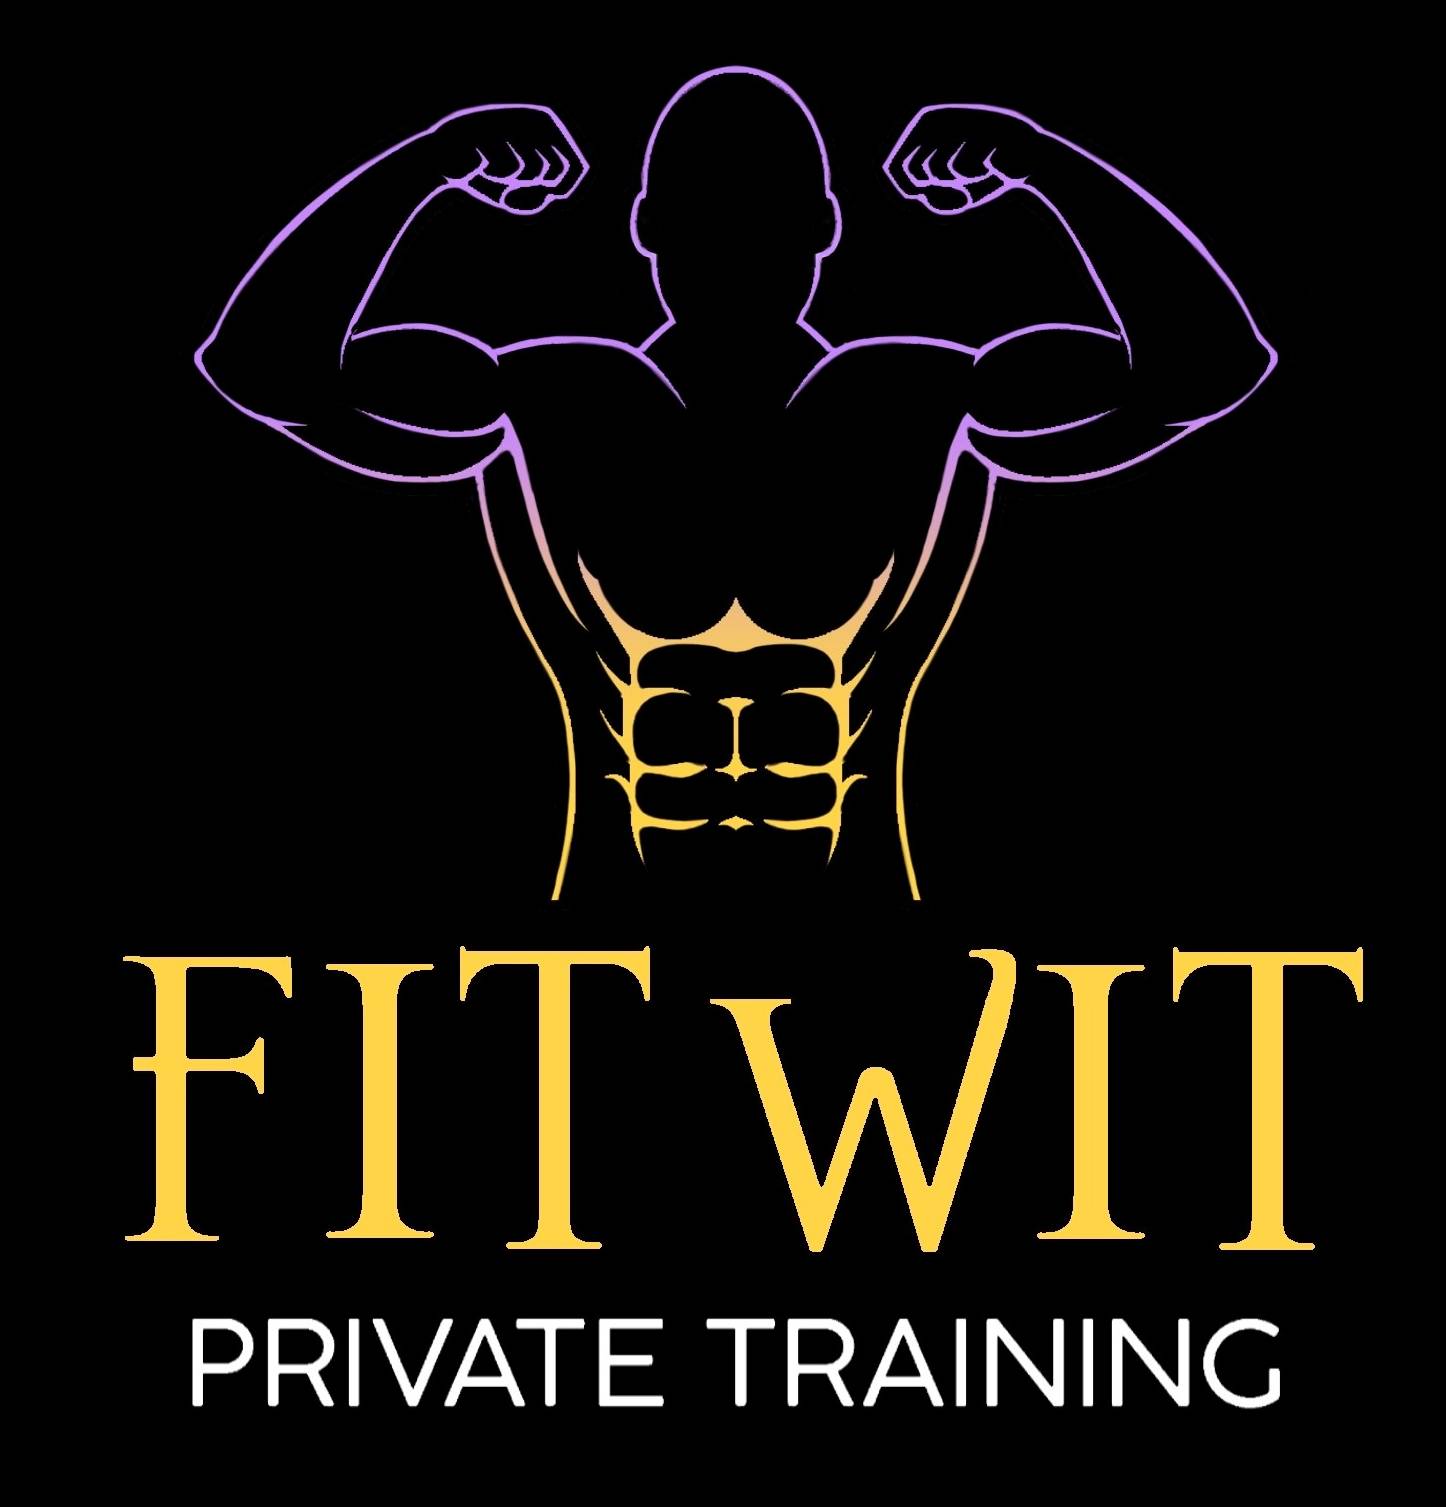 Fitwit Private Training logo